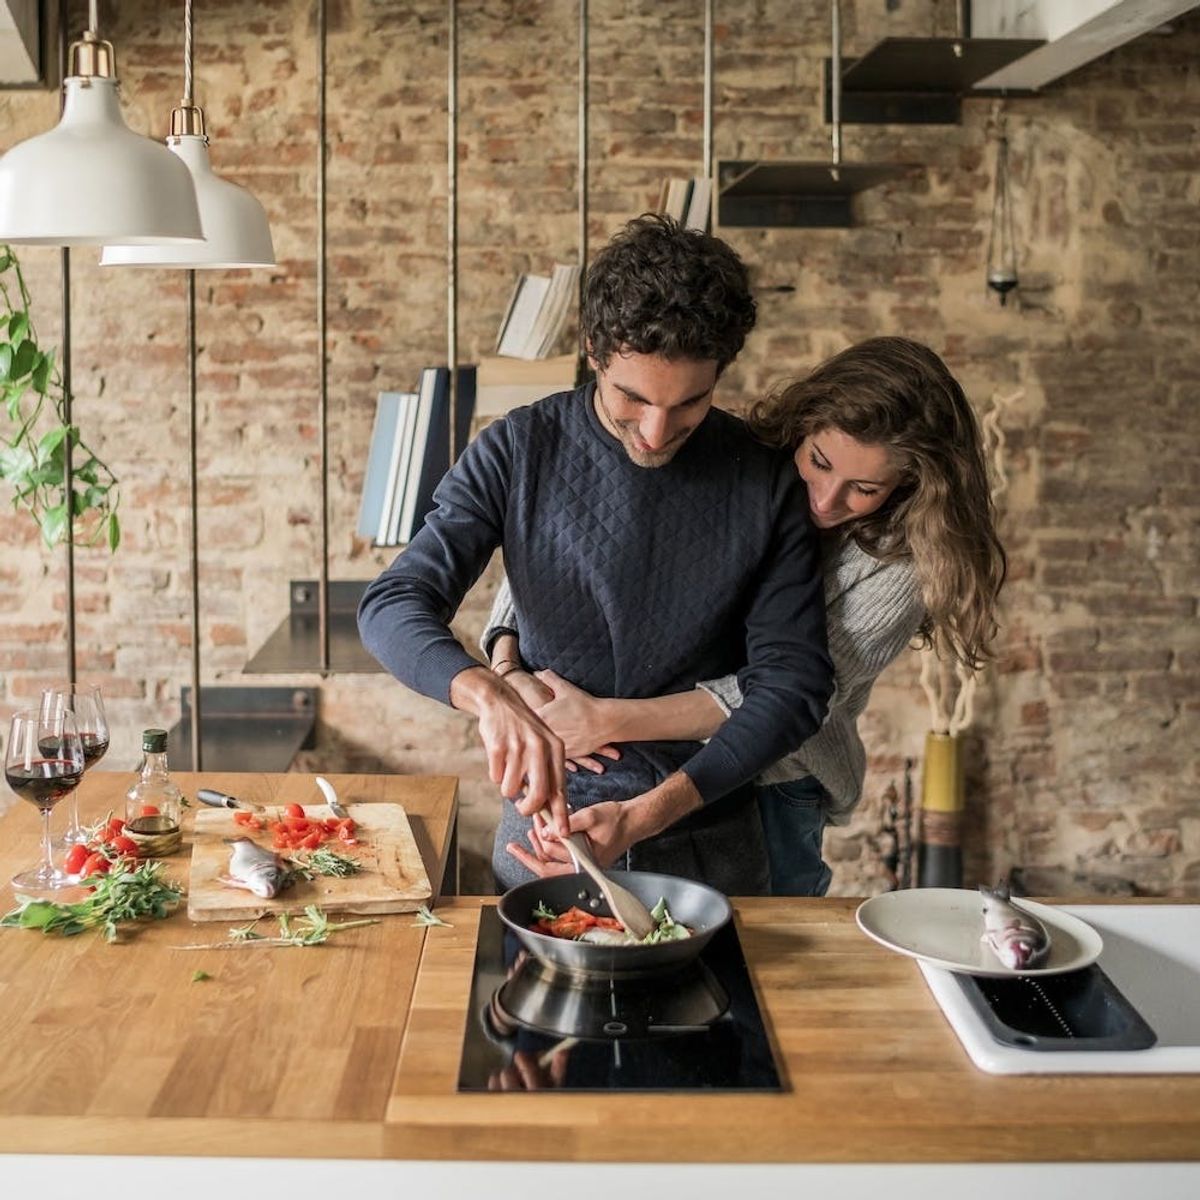 5 Doubts You Might Have After Moving In Together — And How to Deal With Them